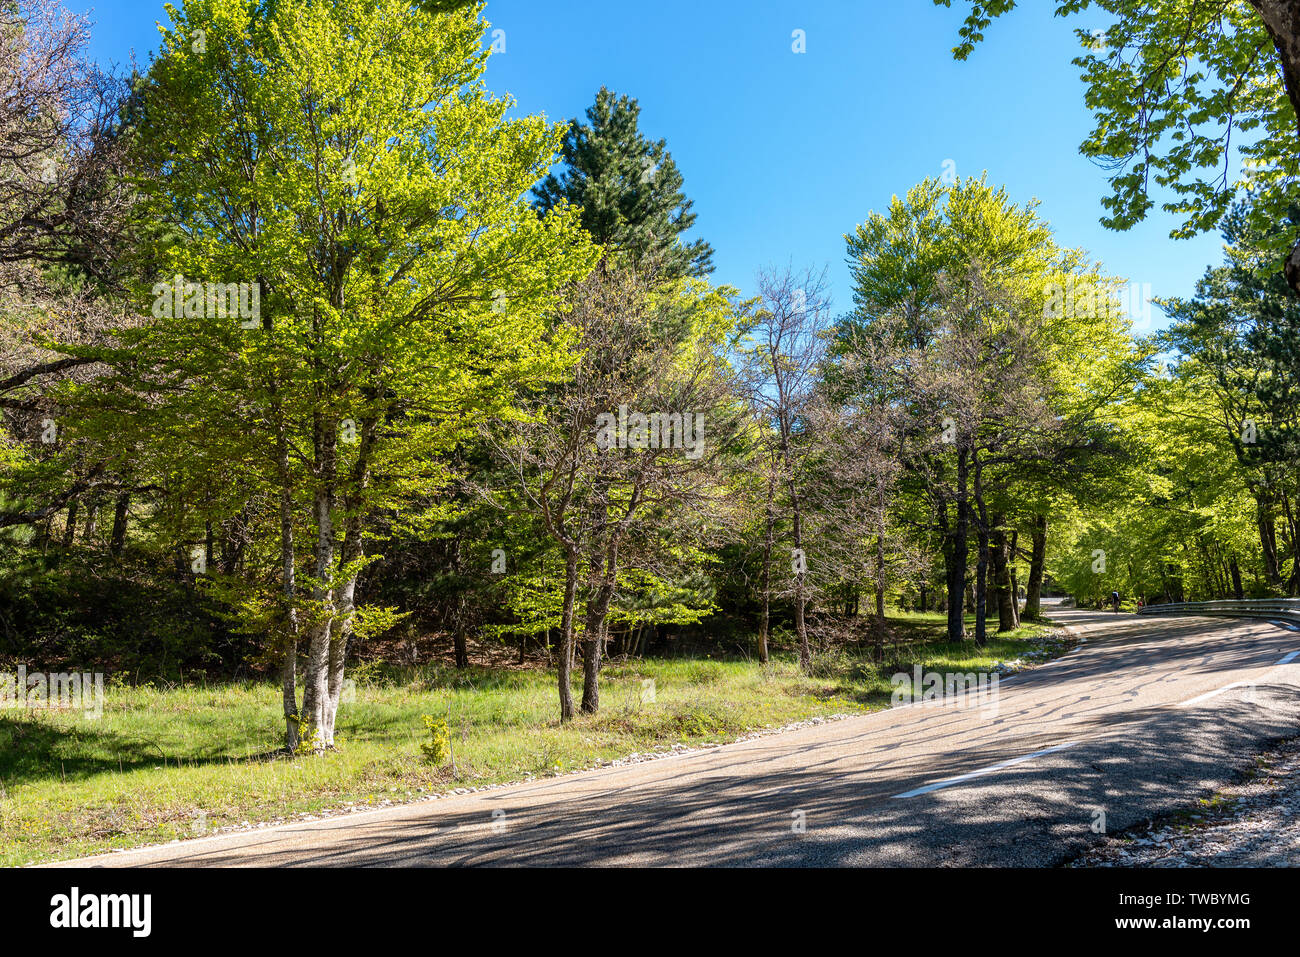 Roadside trees and clear blue skies Stock Photo